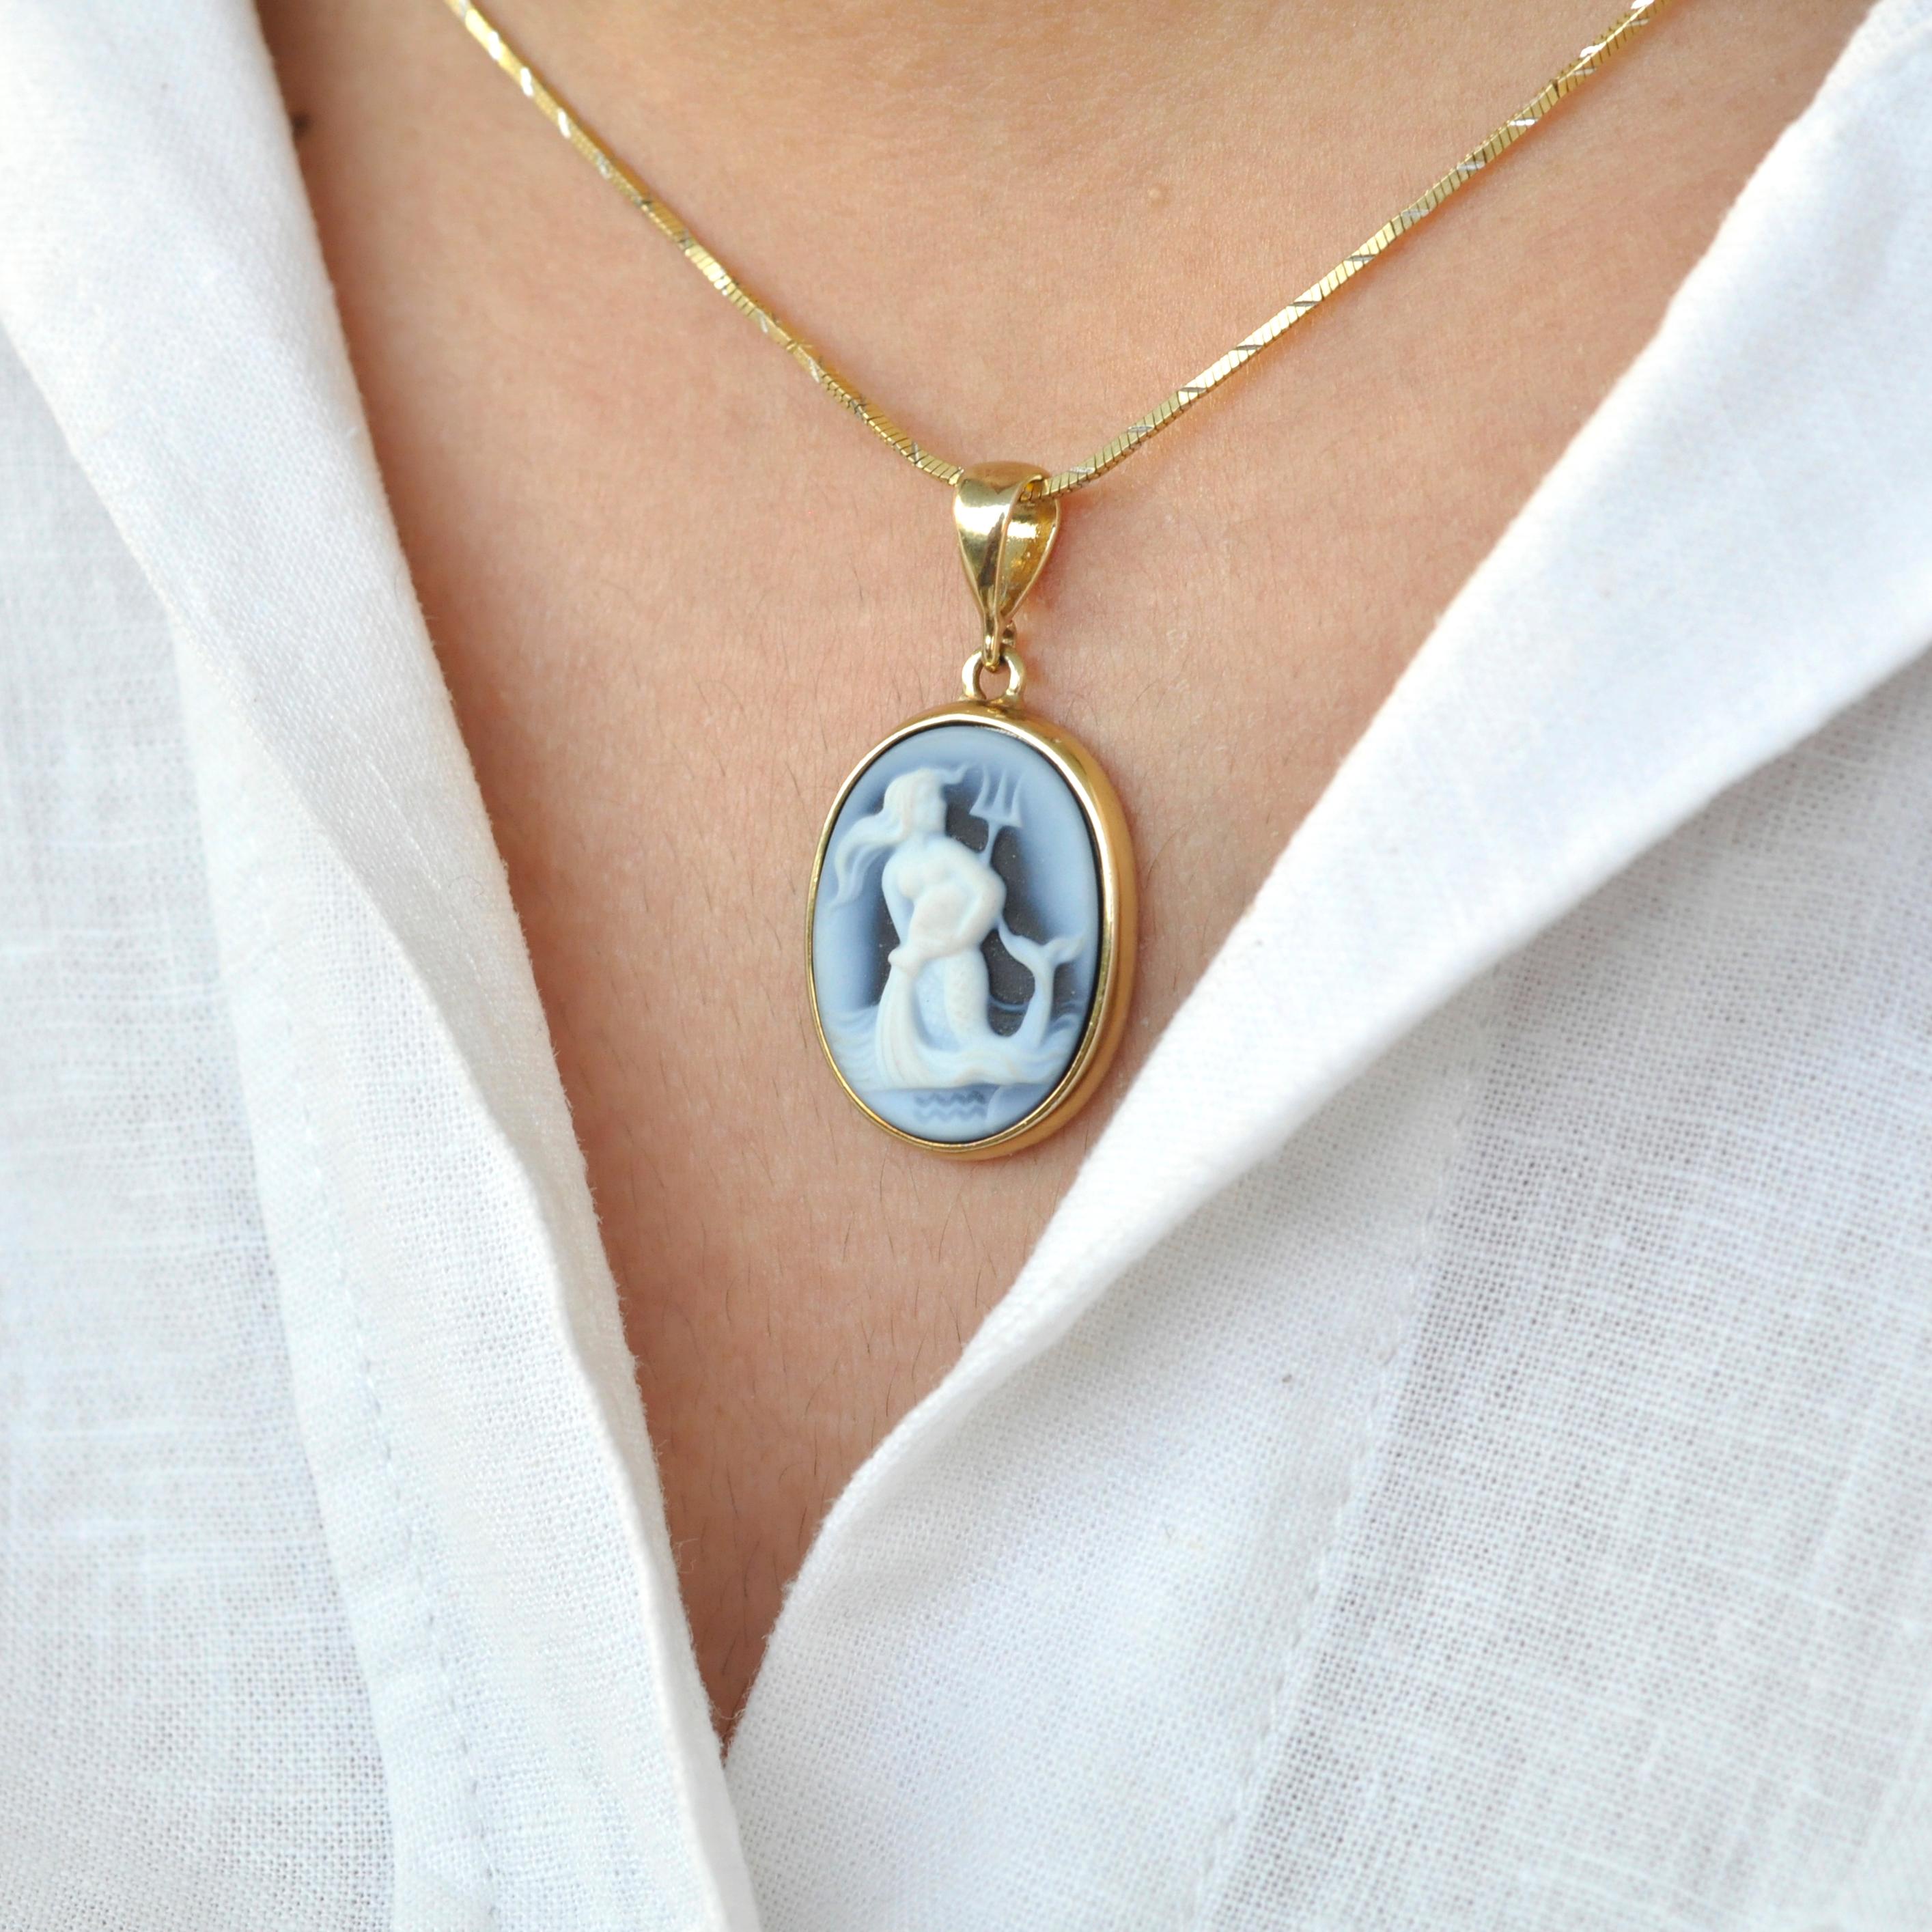 Introducing the captivating Aquarius Zodiac Carving Cameo Pendant Necklace from our Zodiac Collection. This necklace features a stunning cameo meticulously crafted by an expert cameo engraver in Germany. The cameo is skillfully engraved on a relief